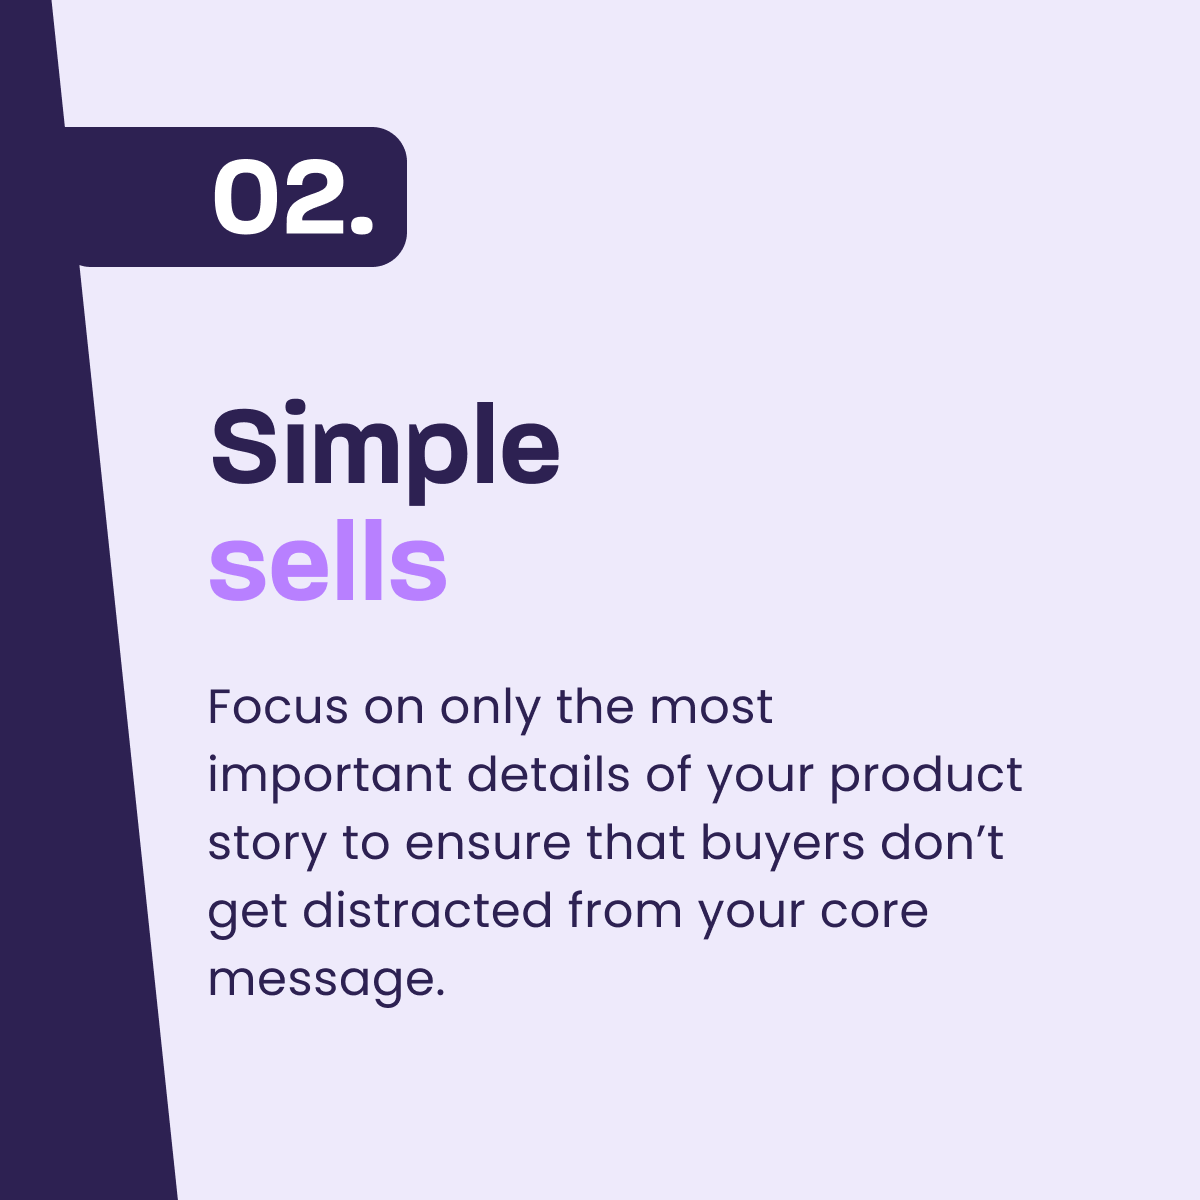 Keep your product story simple